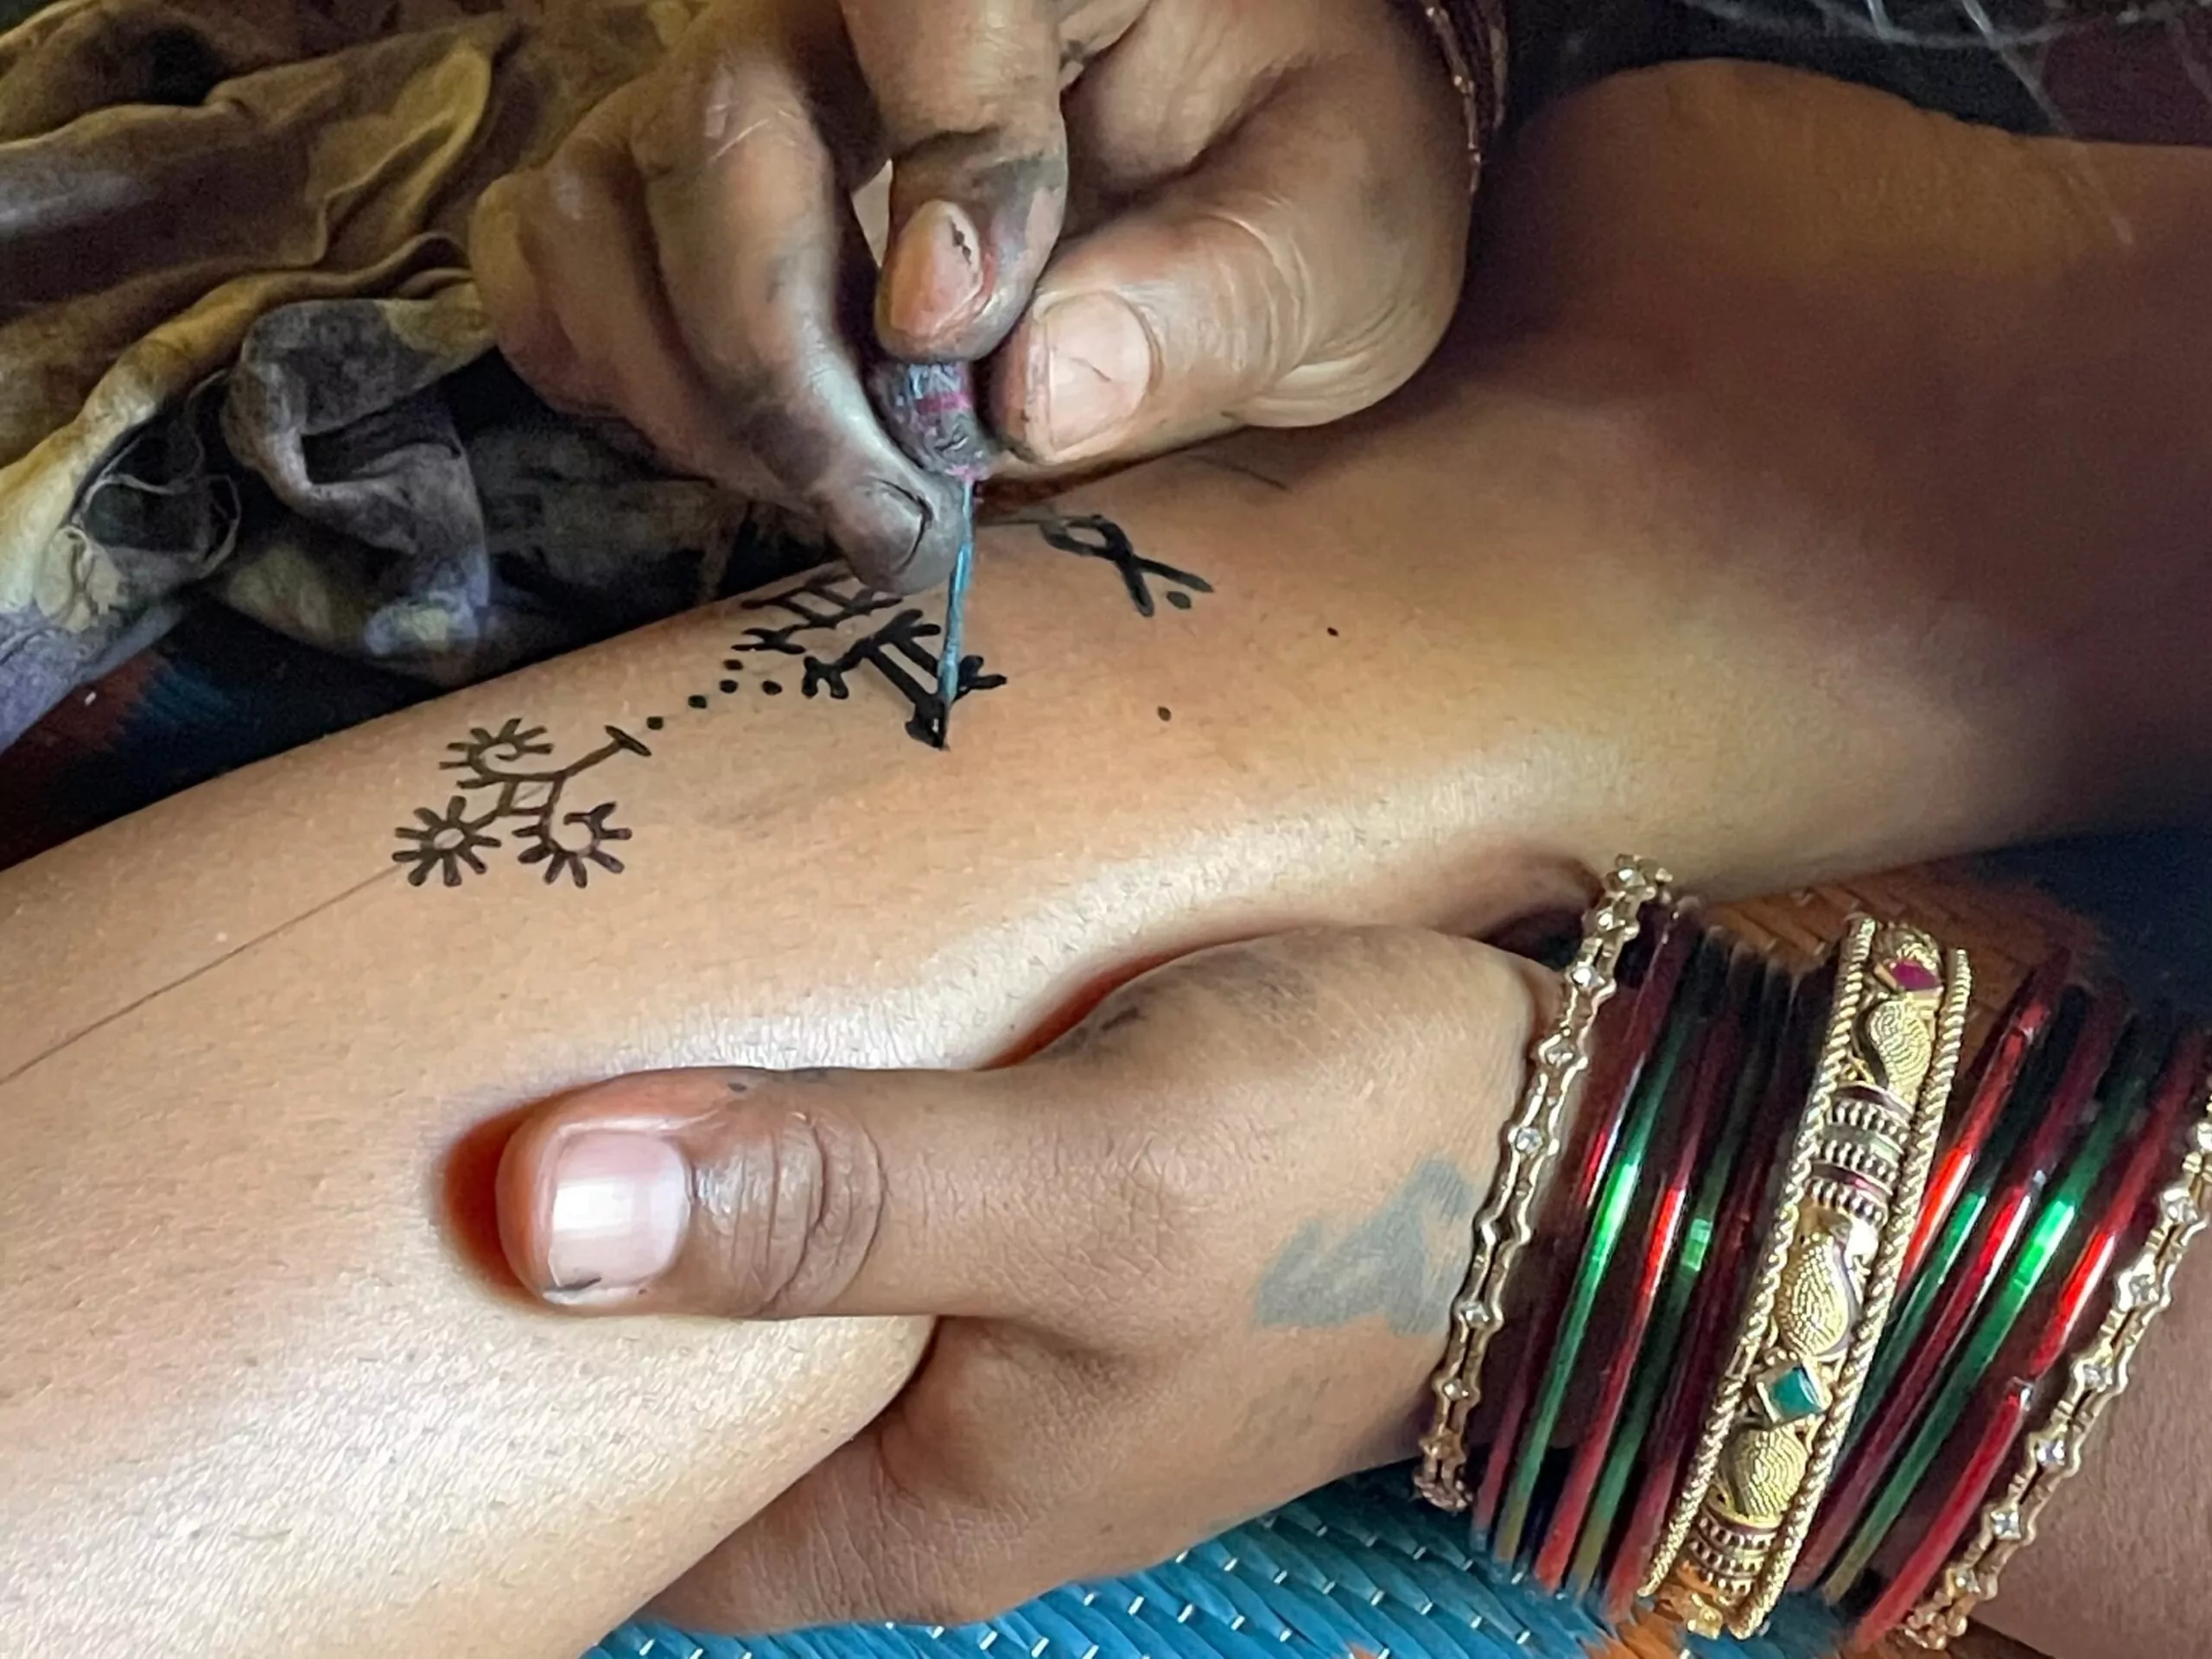 Indian art and tattoos